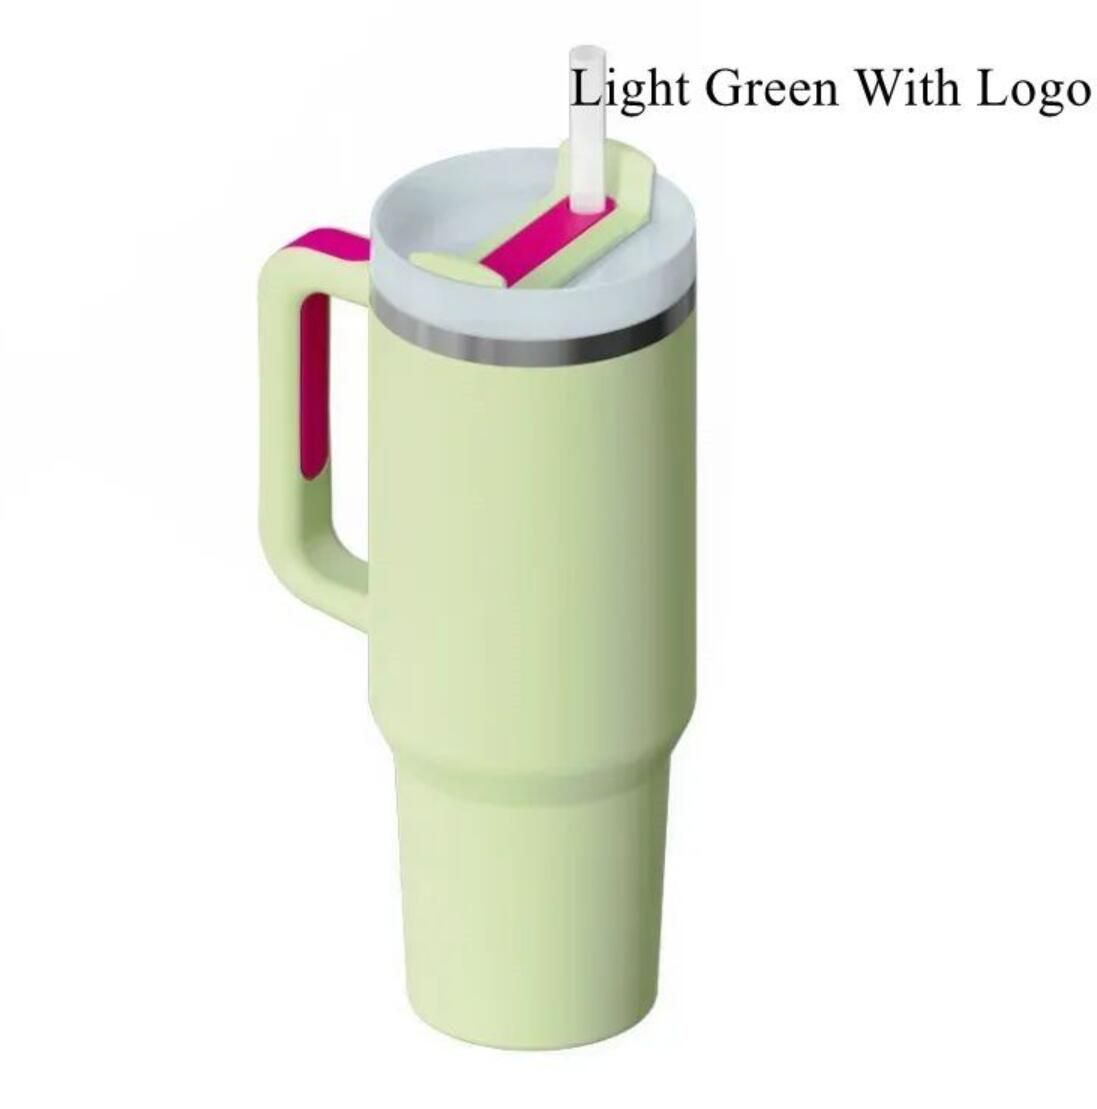 14 light green with logo